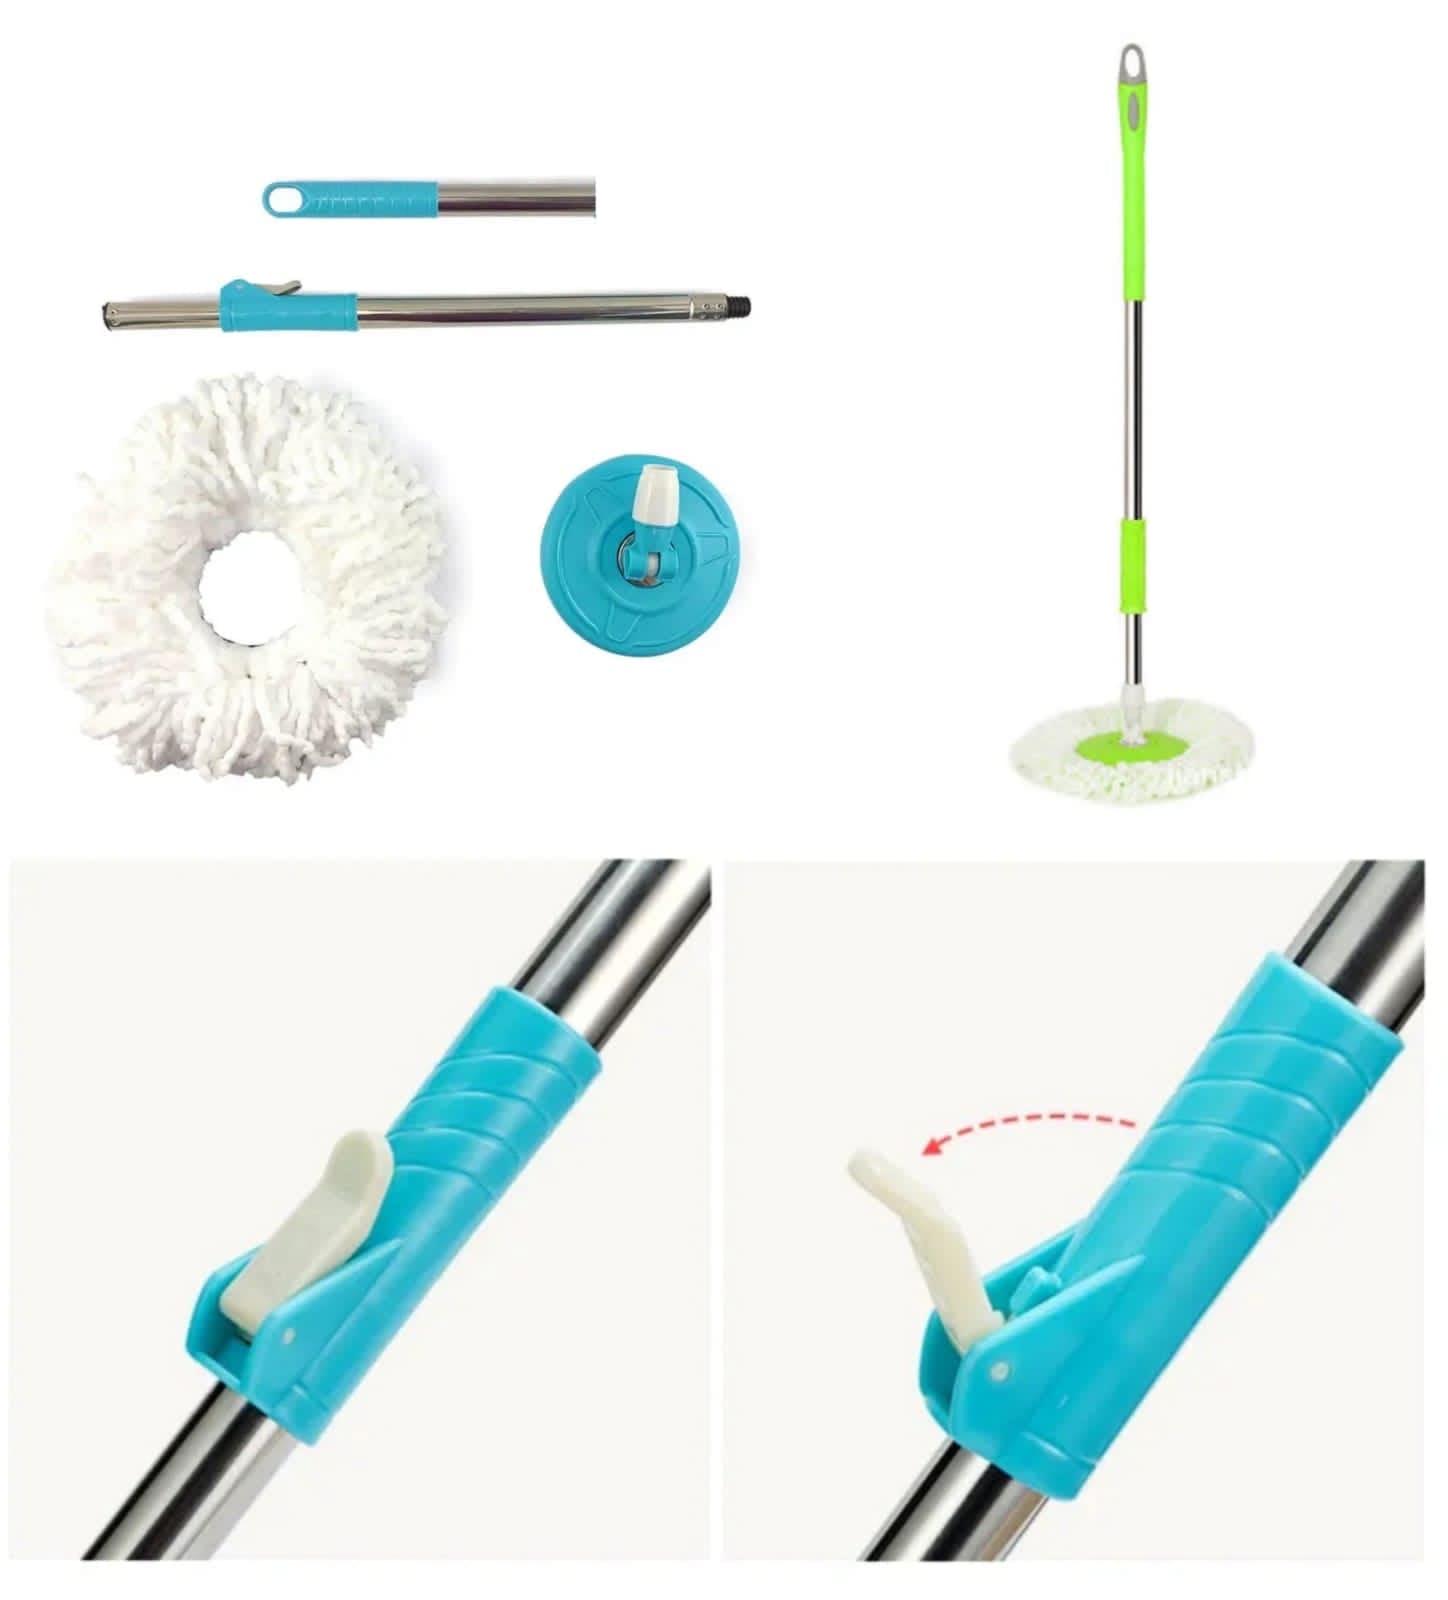 Multipurpose Neez Mop, Spin Cleaning Mop Stick, Self Adhesive Mop and Broom Holder, Extendable Floor Cleaning Mop, Detachable Swivel Squeeze Mop, Long Handled Microfiber Floor Mop